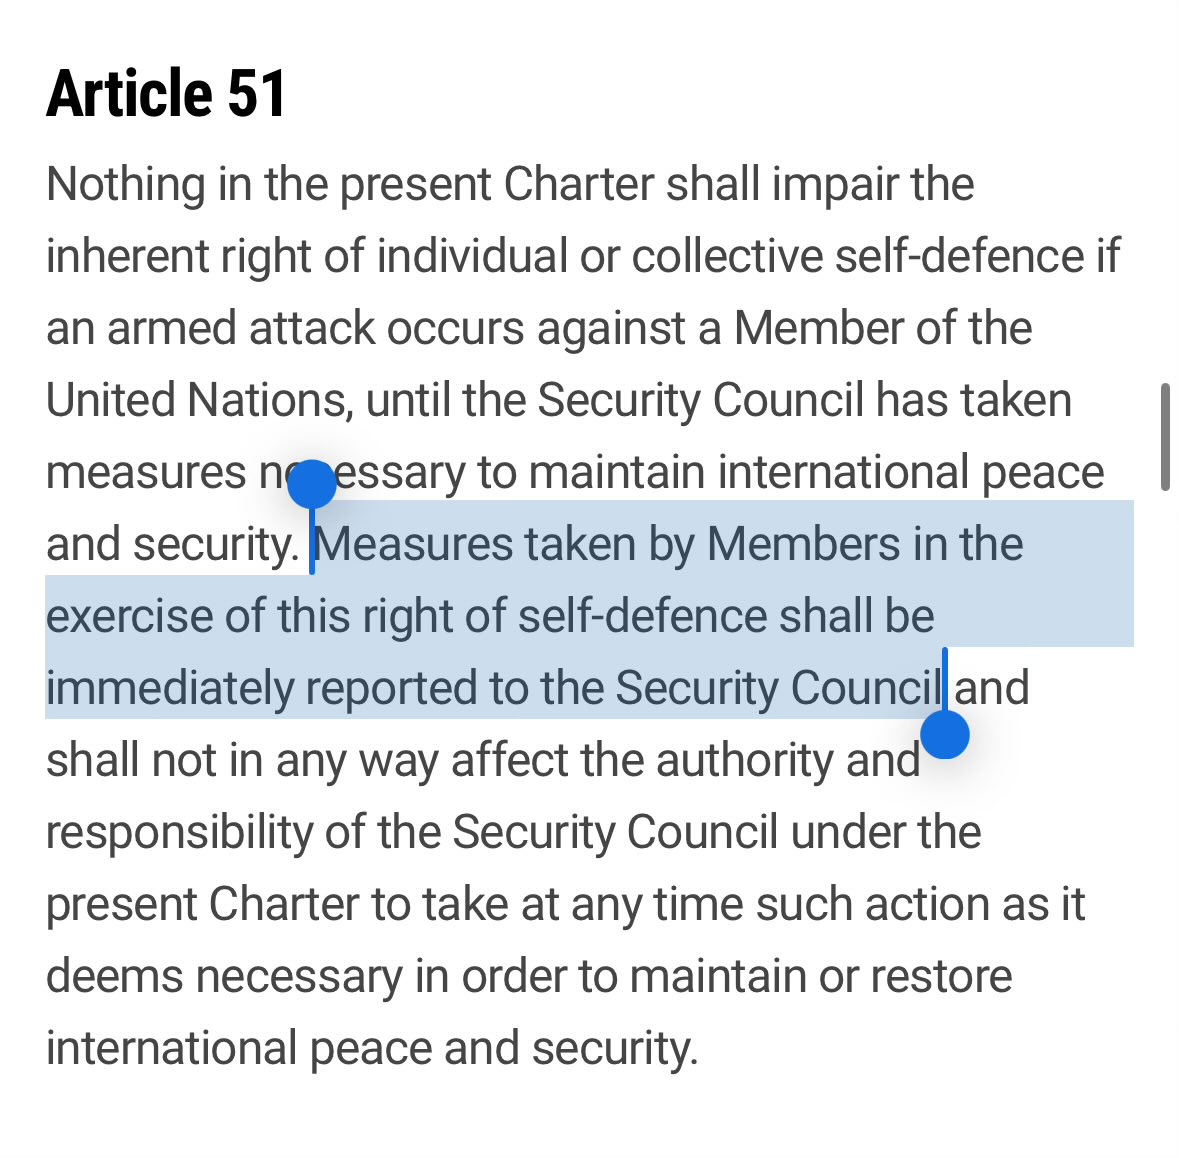 Iran's Article 51 letter to the UN Security Council